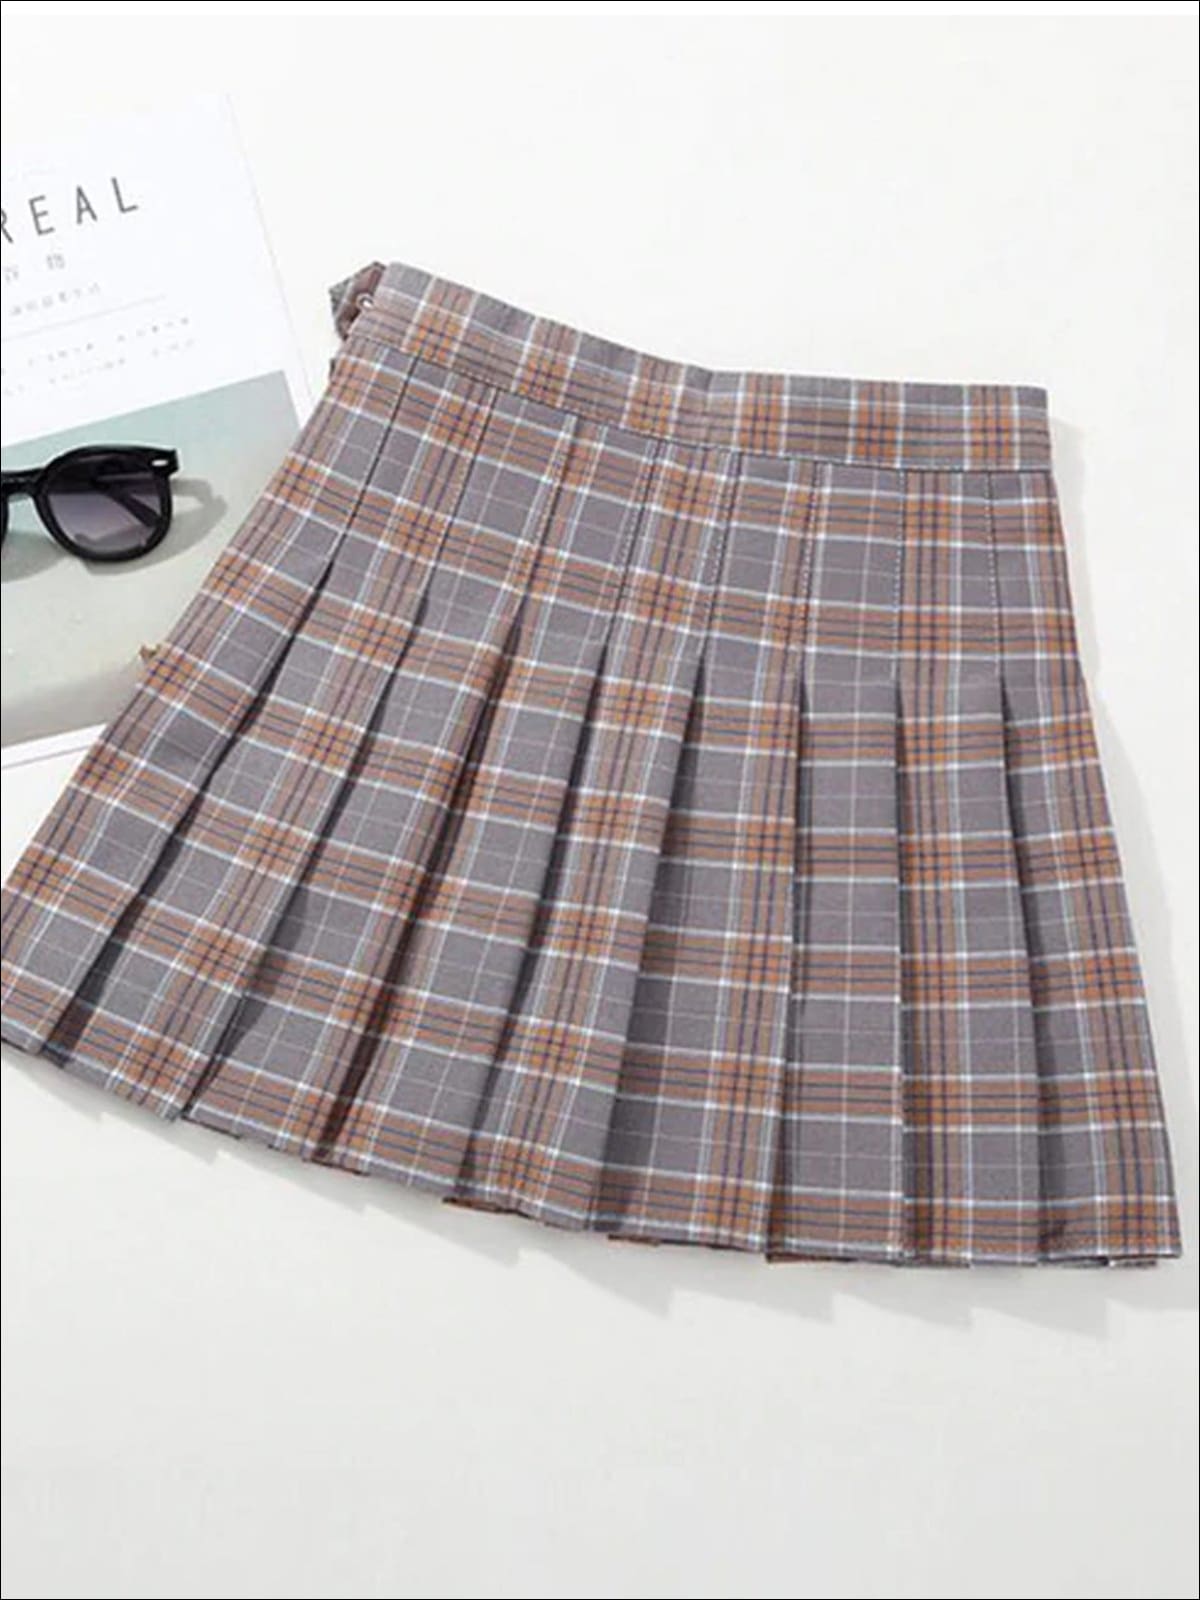 Cute Clothes For Girls | Preppy Plaid Pleated Skirt | Girls Boutique